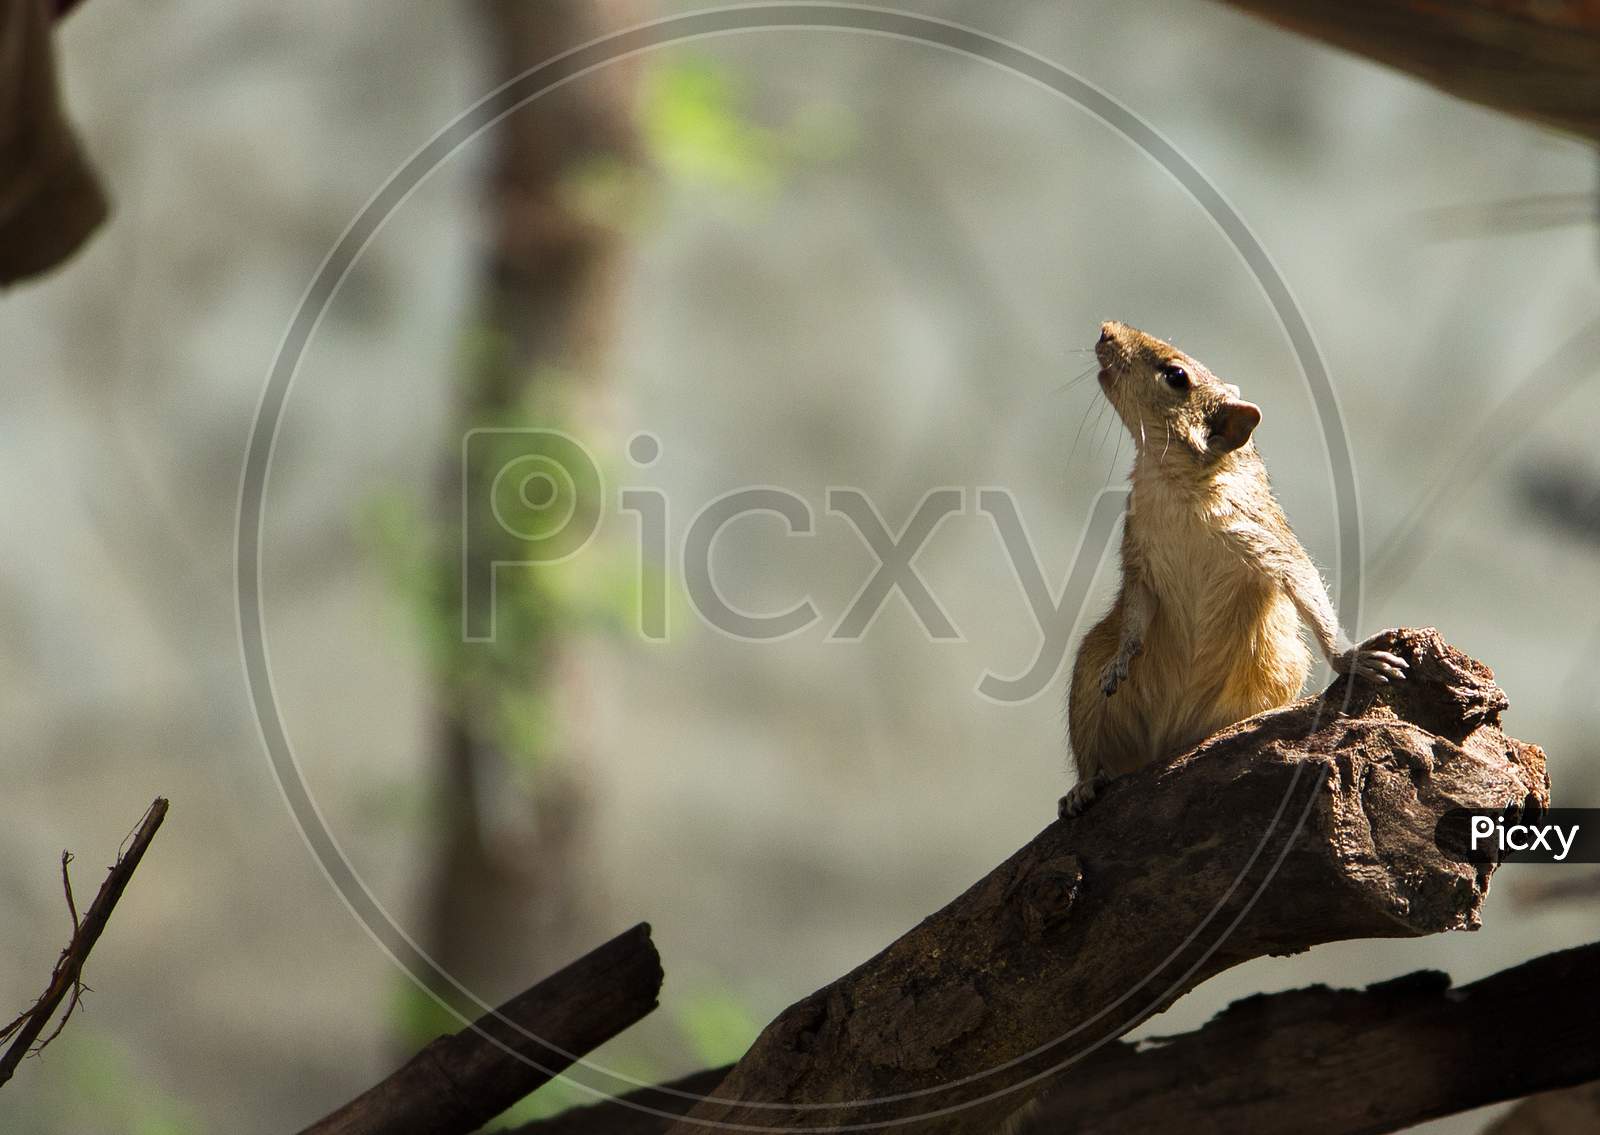 Cute Palm Squirrel Standing And Looking Up On Tree.The Indian Palm Squirrel Or Three-Striped Palm Squirrel Is A Species Of Rodent In The Family Sciuridae Found Naturally In India And Sri Lanka